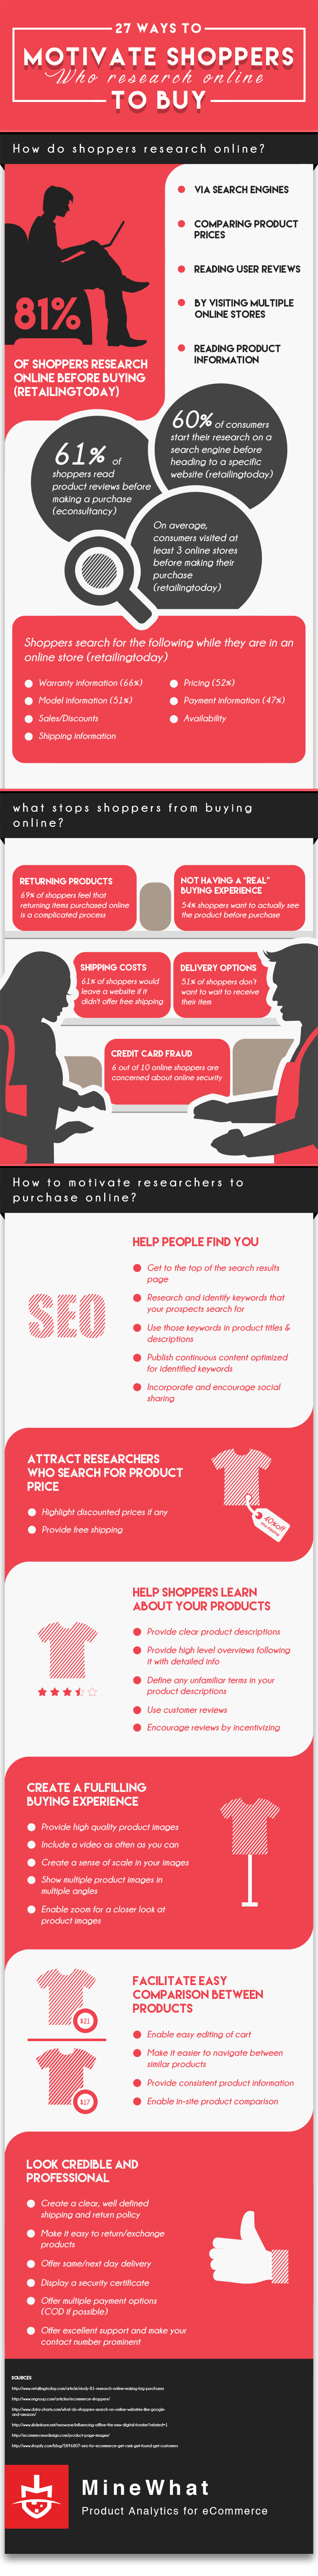 Infographic-MOTIVATE-shoppers-who-research-online-TO-BUY